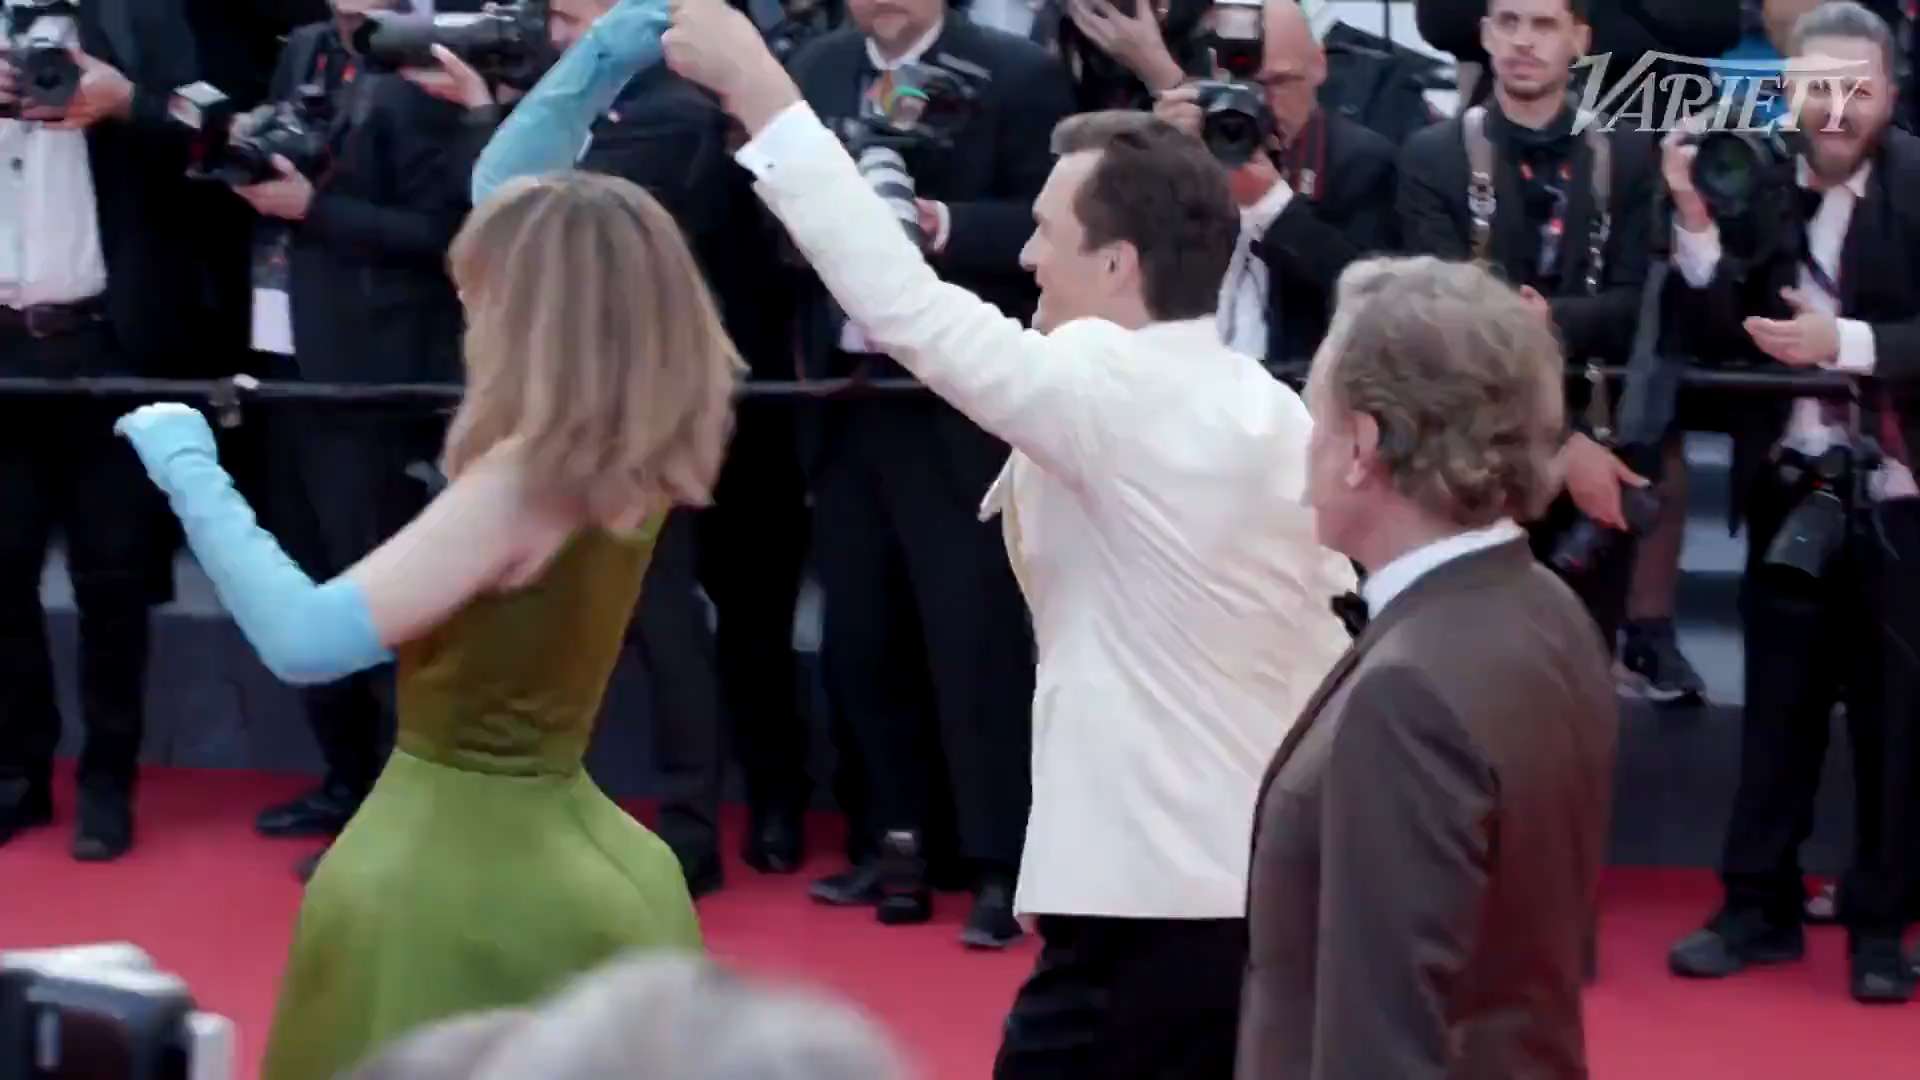 Maya Hawke dances passionately on the red carpet short MP4 video